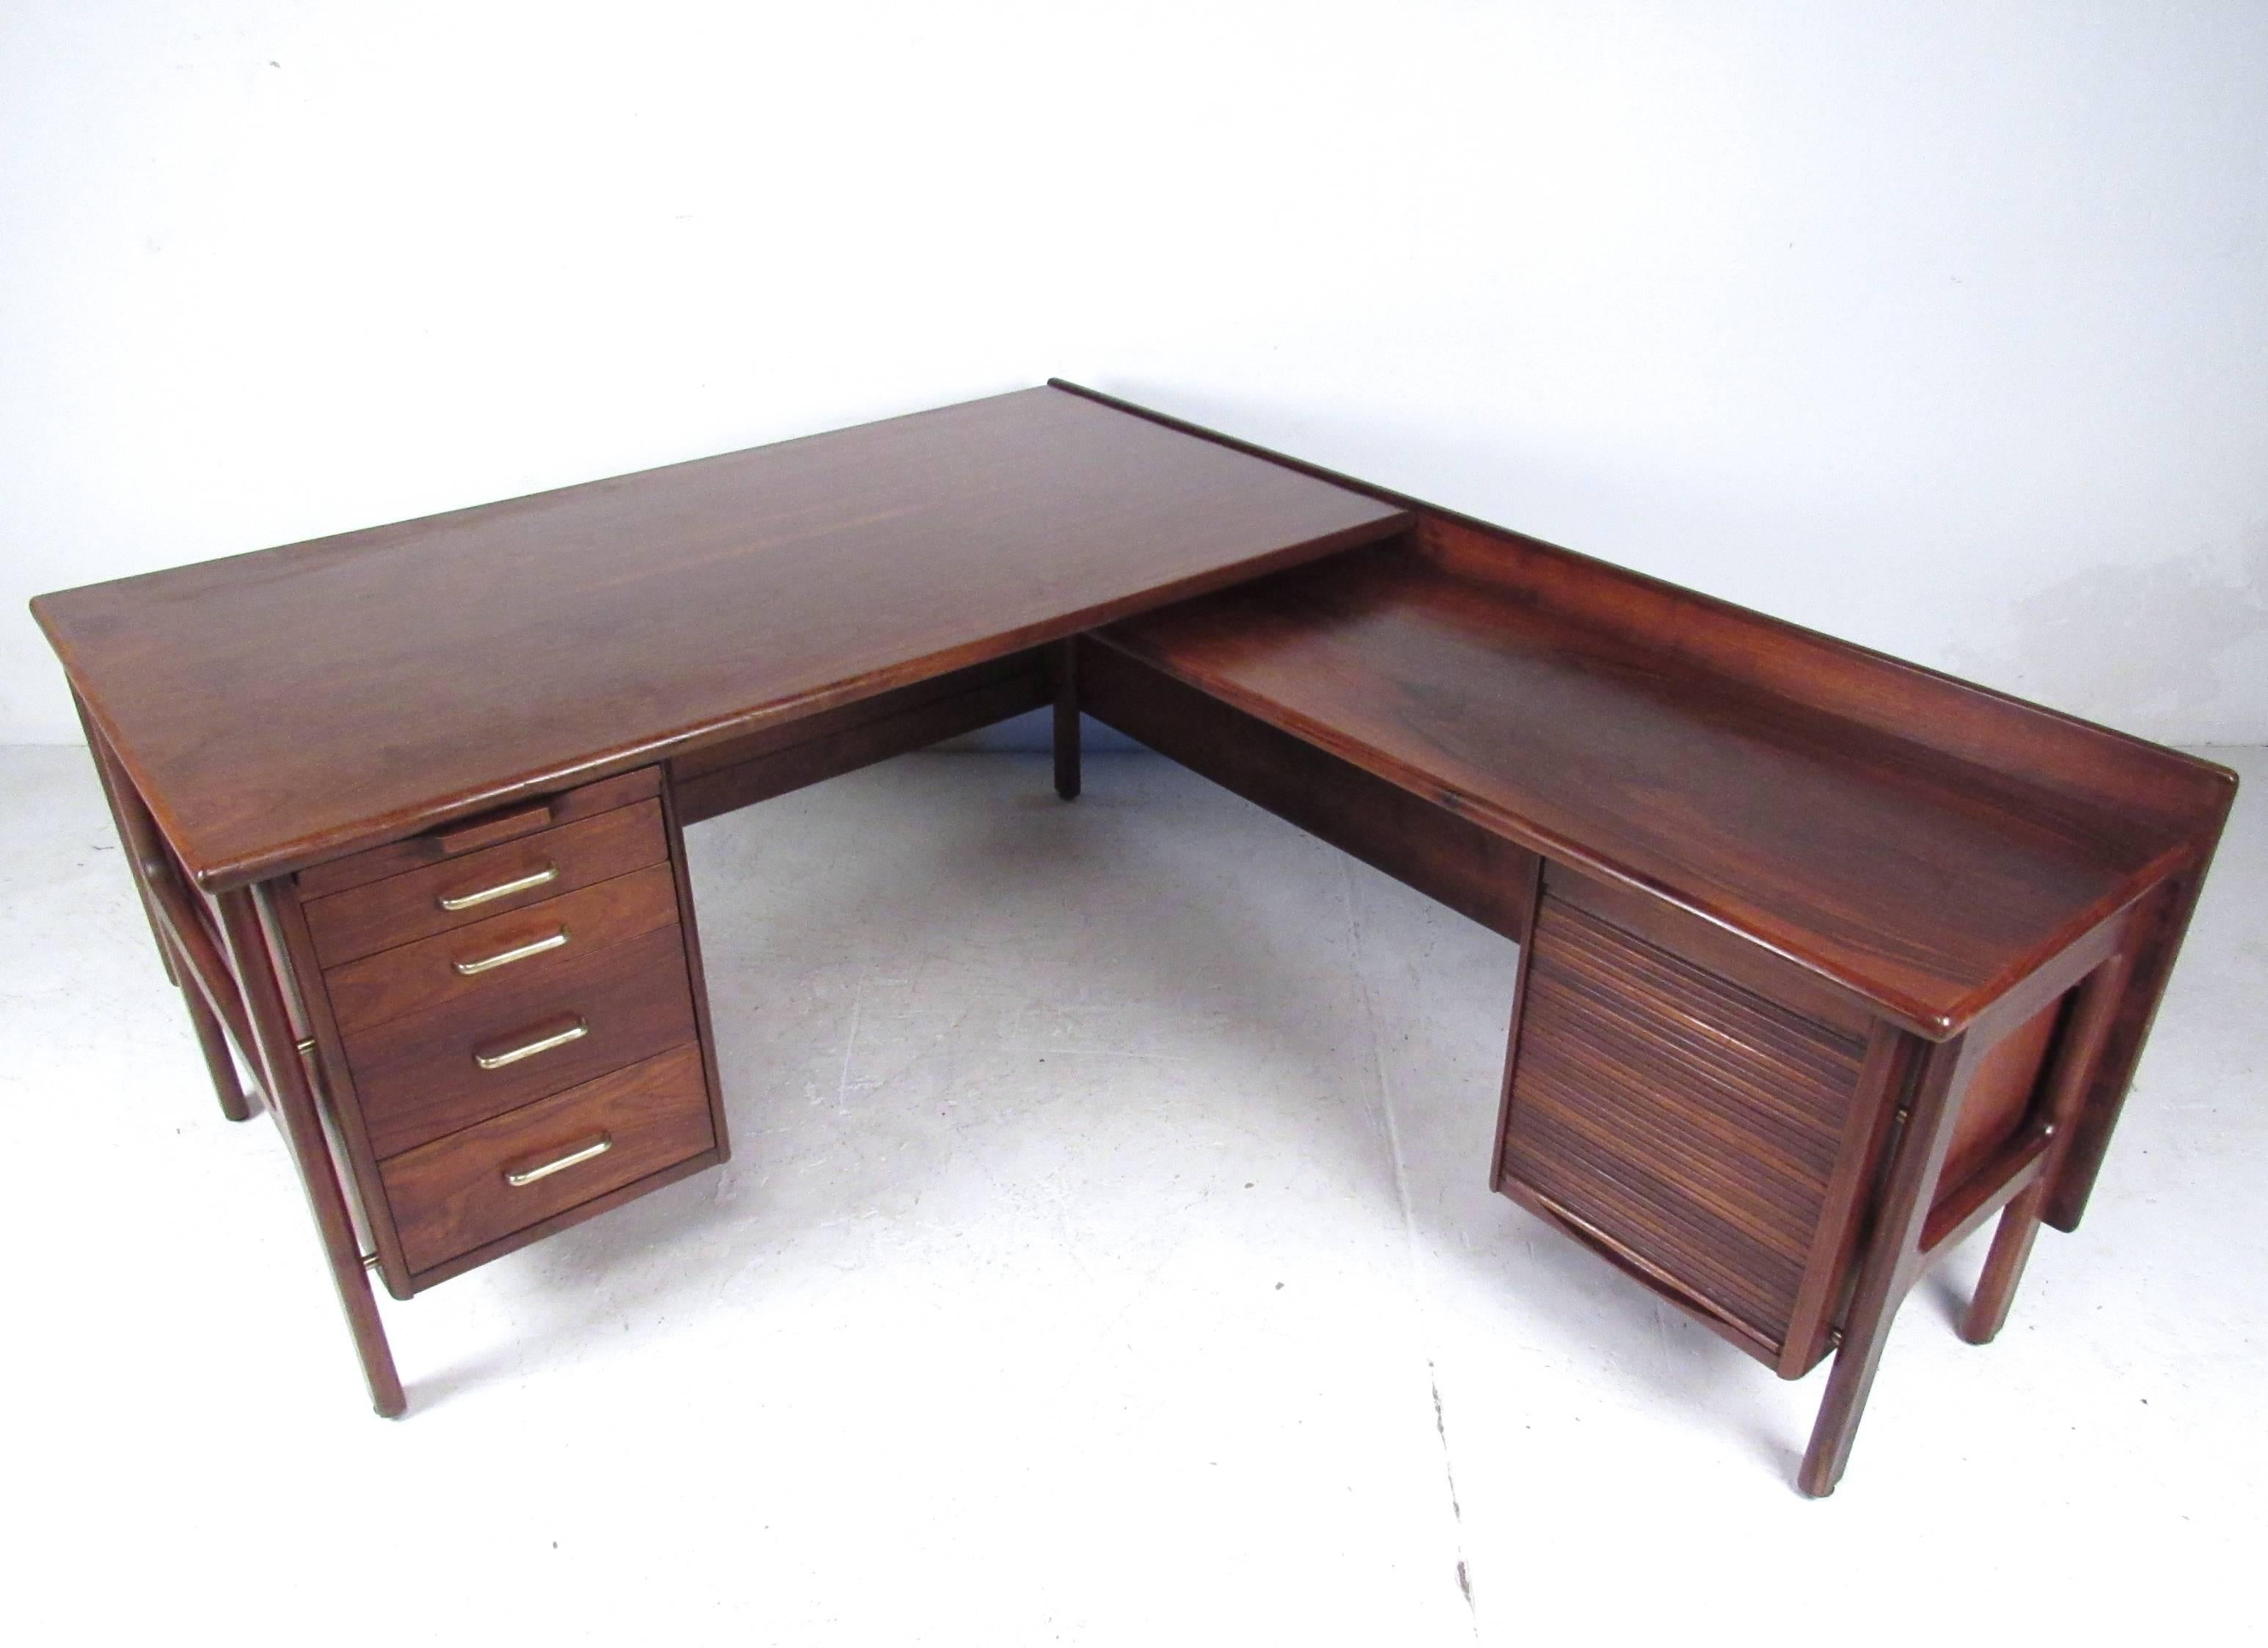 This stunning vintage desk boasts a spacious two-tier L-shaped work surface, offering plenty of room for multiple computers, printers, or other office needs. Added storage in metal glide drawers and extra filing behind vertical tambour panel add to